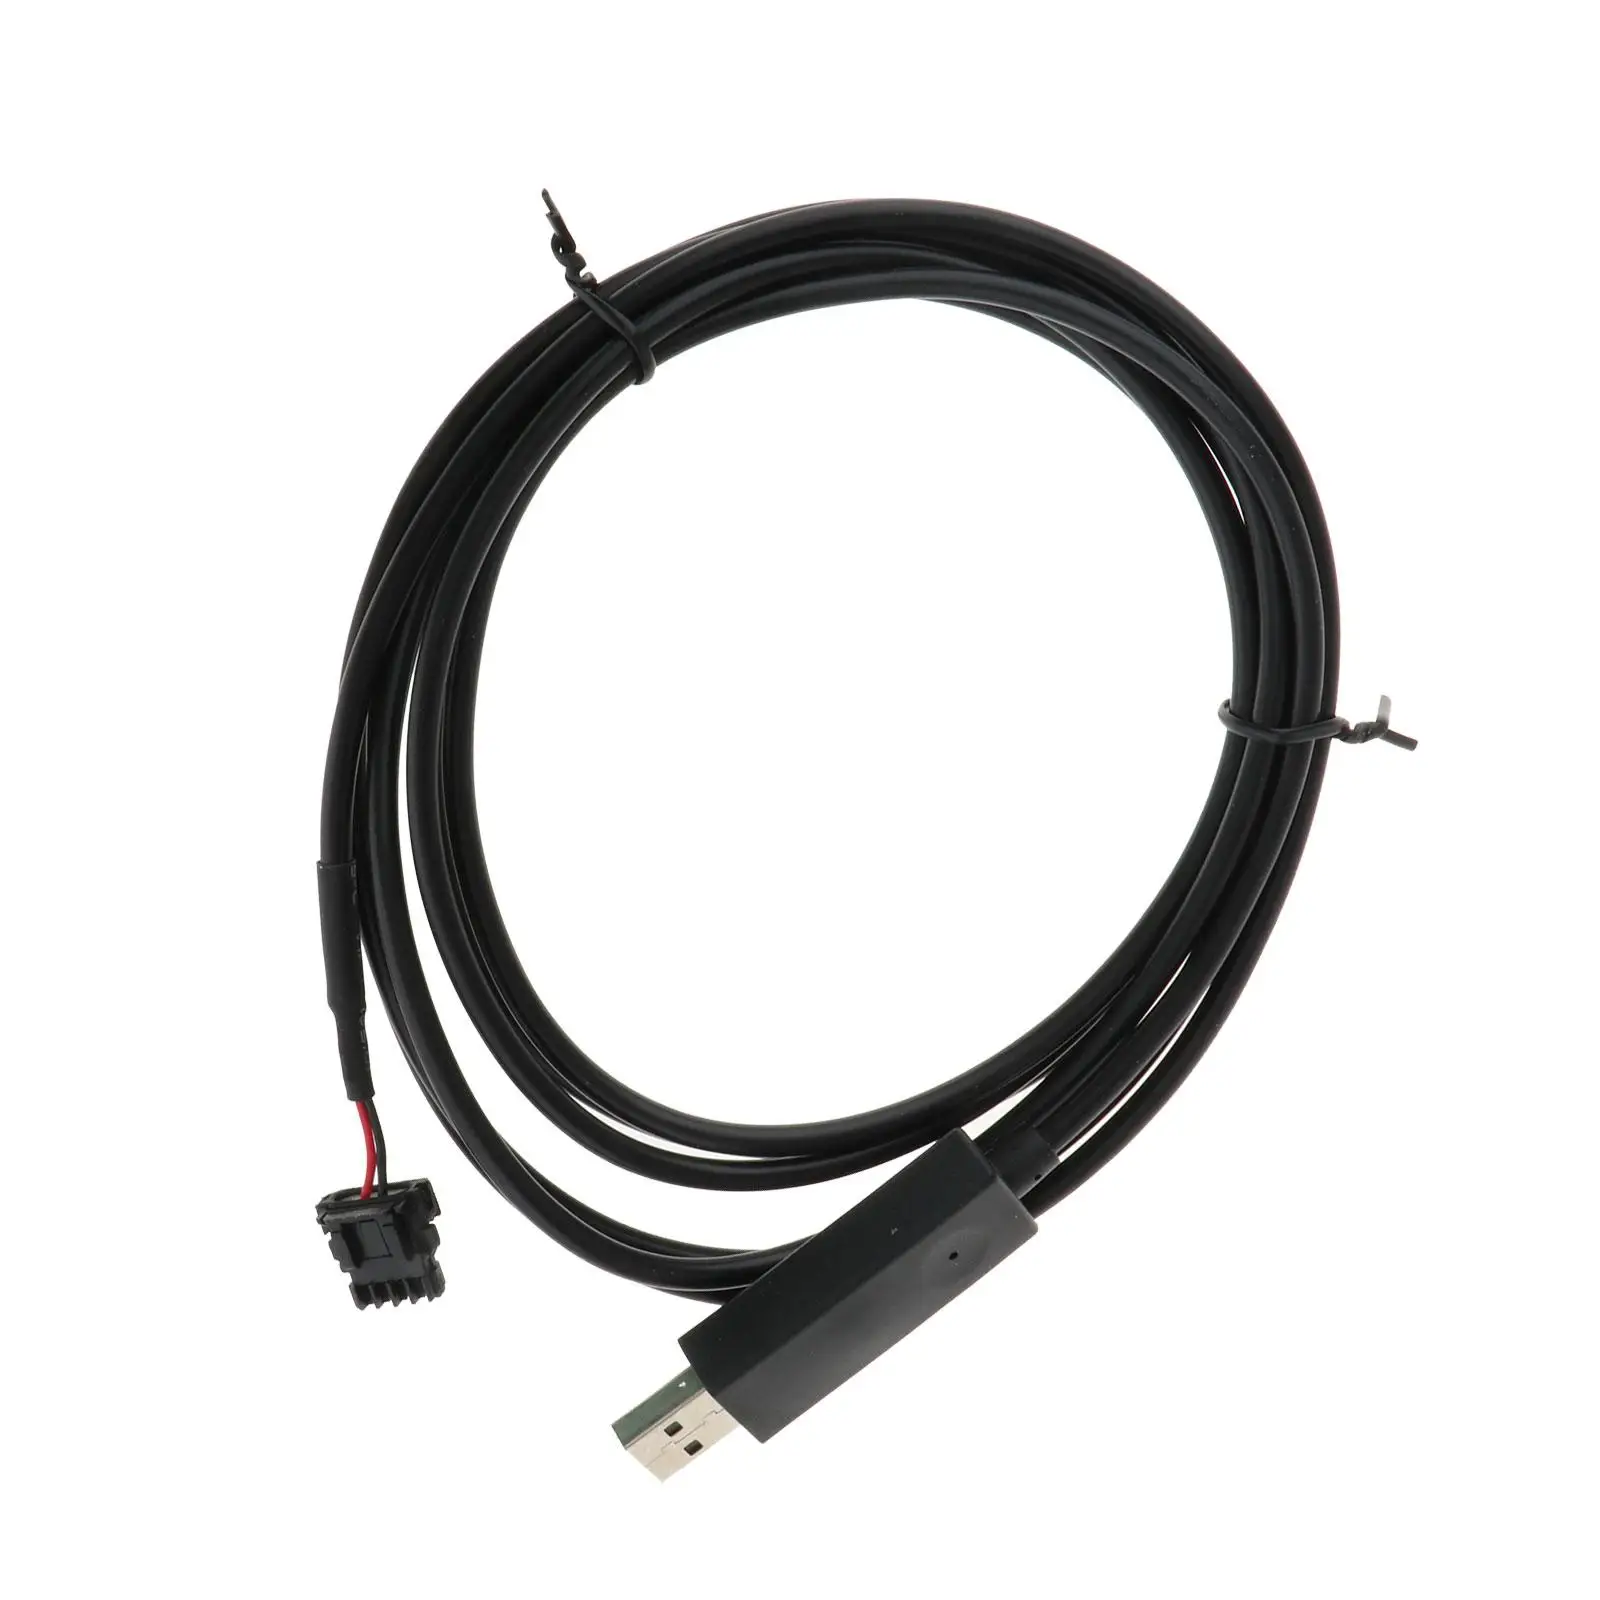 USB Can Communication Cable 558-443 Replacement Part Durable Cable Connector with Built in Splitter for Holley Sniper Efi